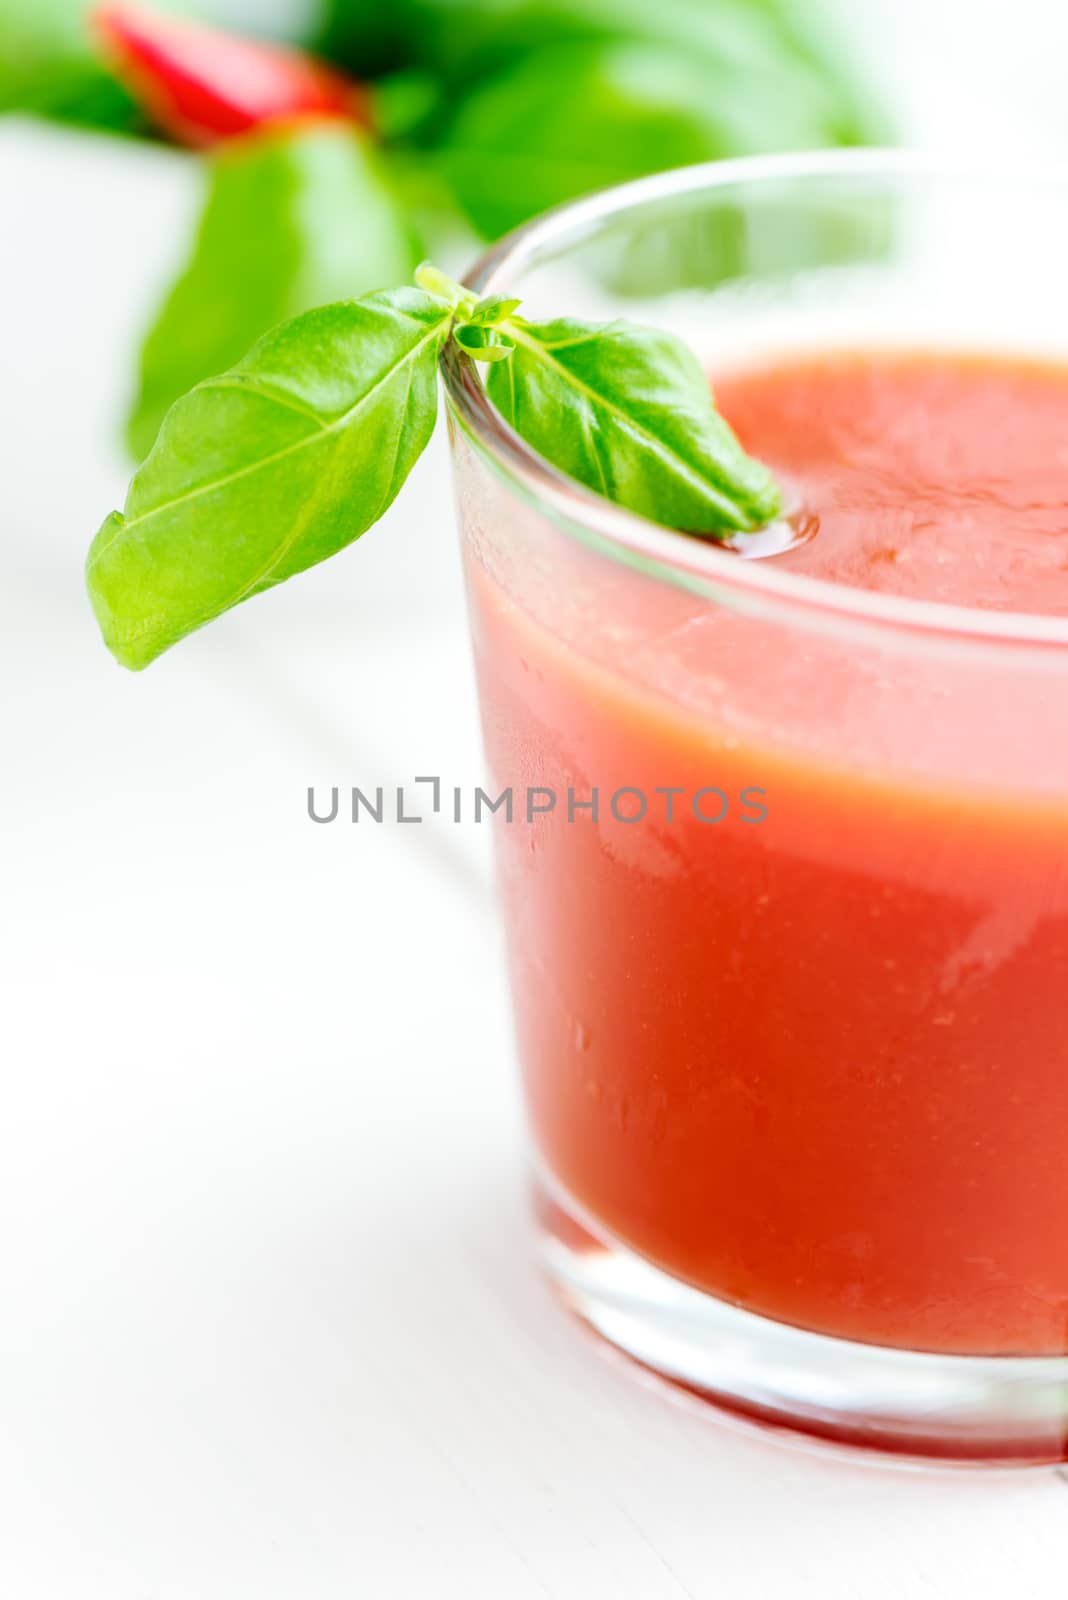 Cold tomato juice in a glass with basil leafs close up